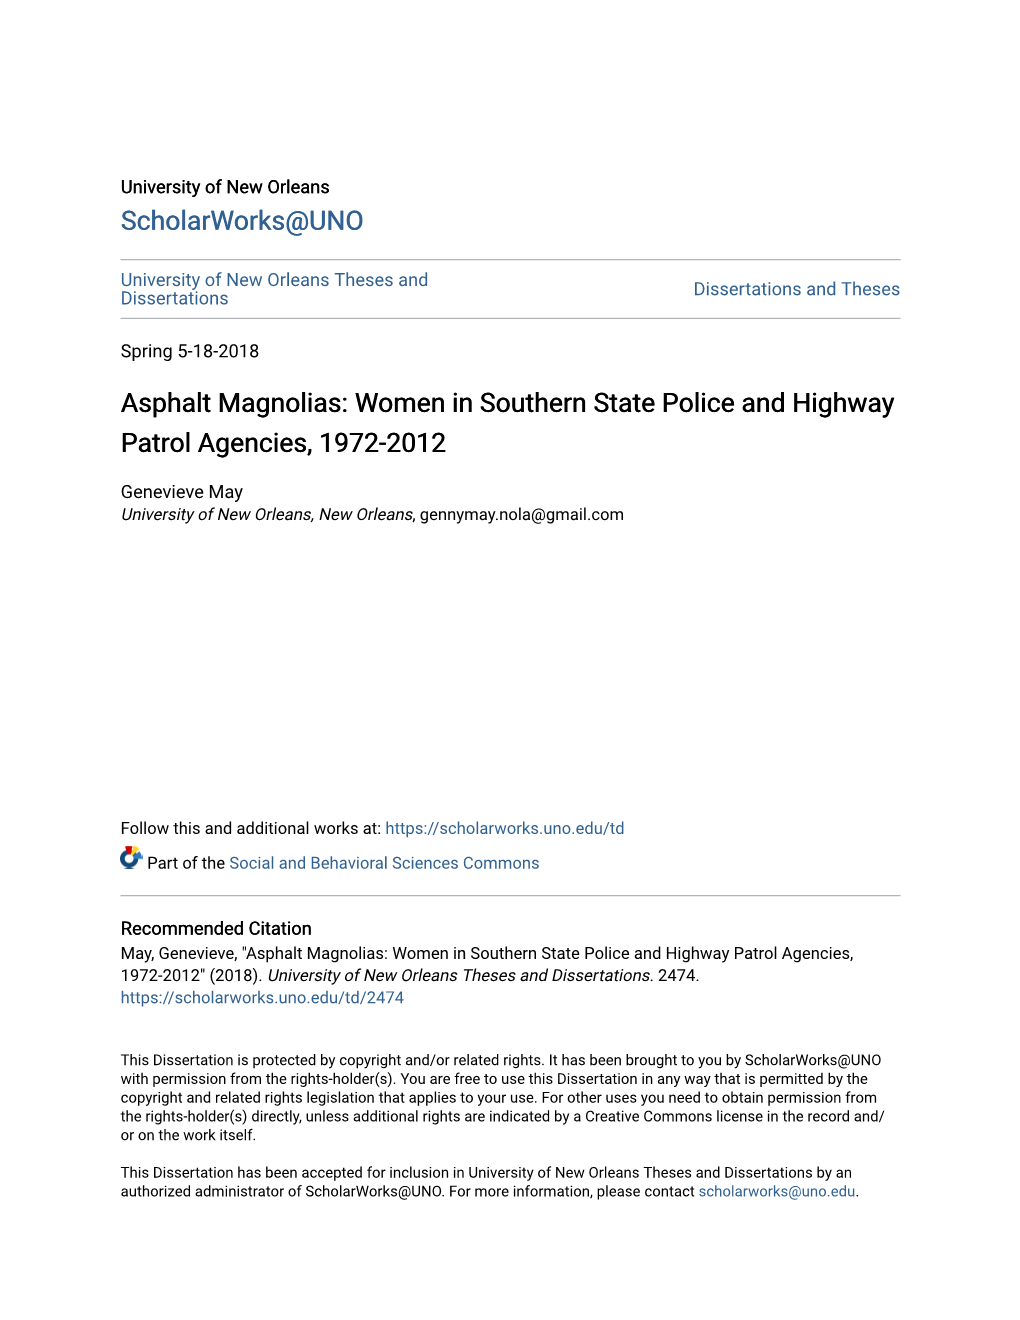 Women in Southern State Police and Highway Patrol Agencies, 1972-2012